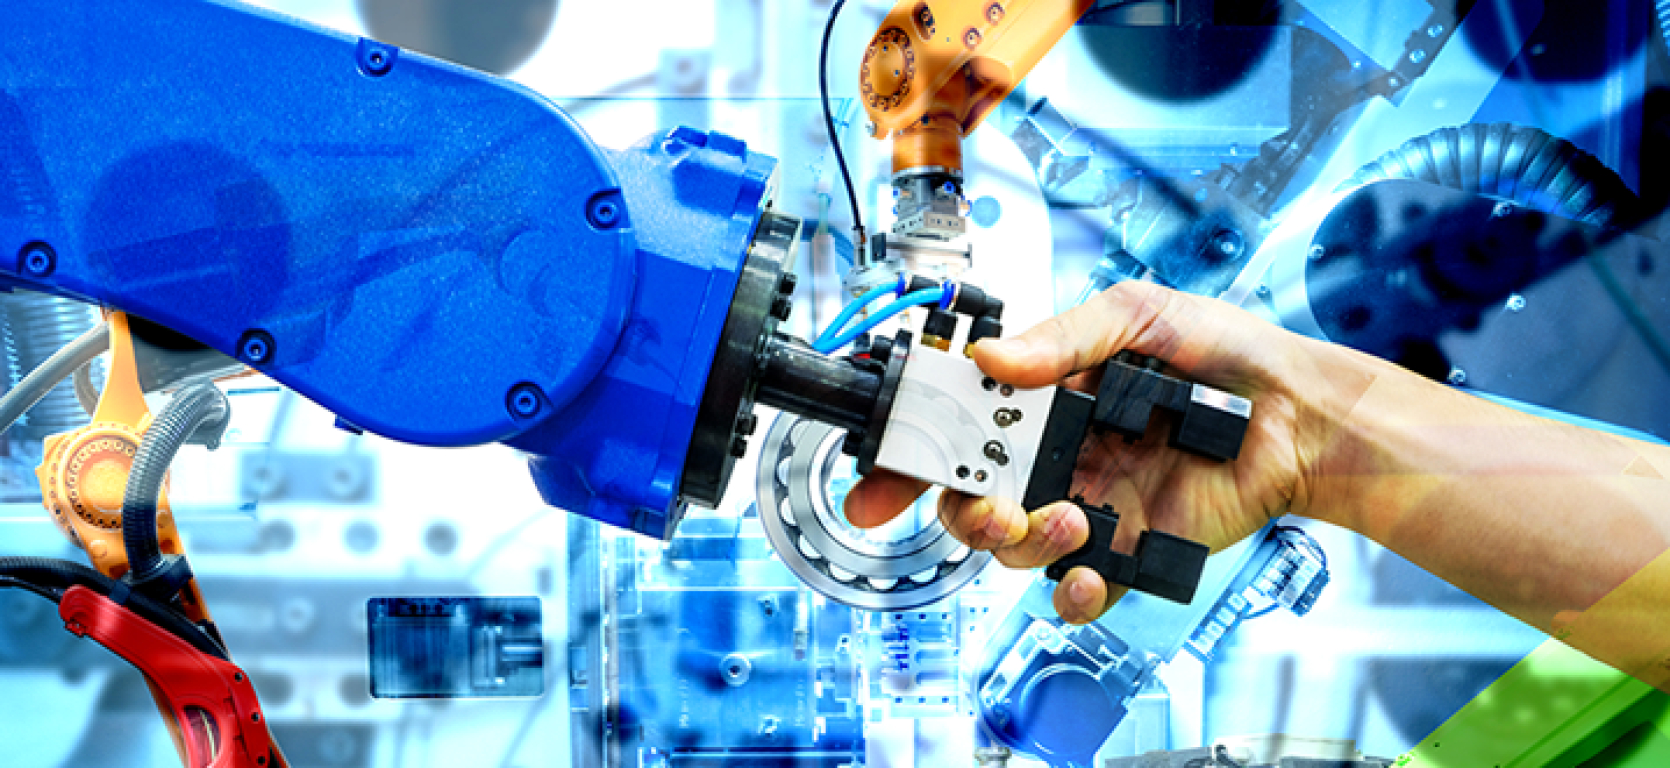 ADVANTAGES OF COBOTS IN THE MANUFACTURING INDUSTRY